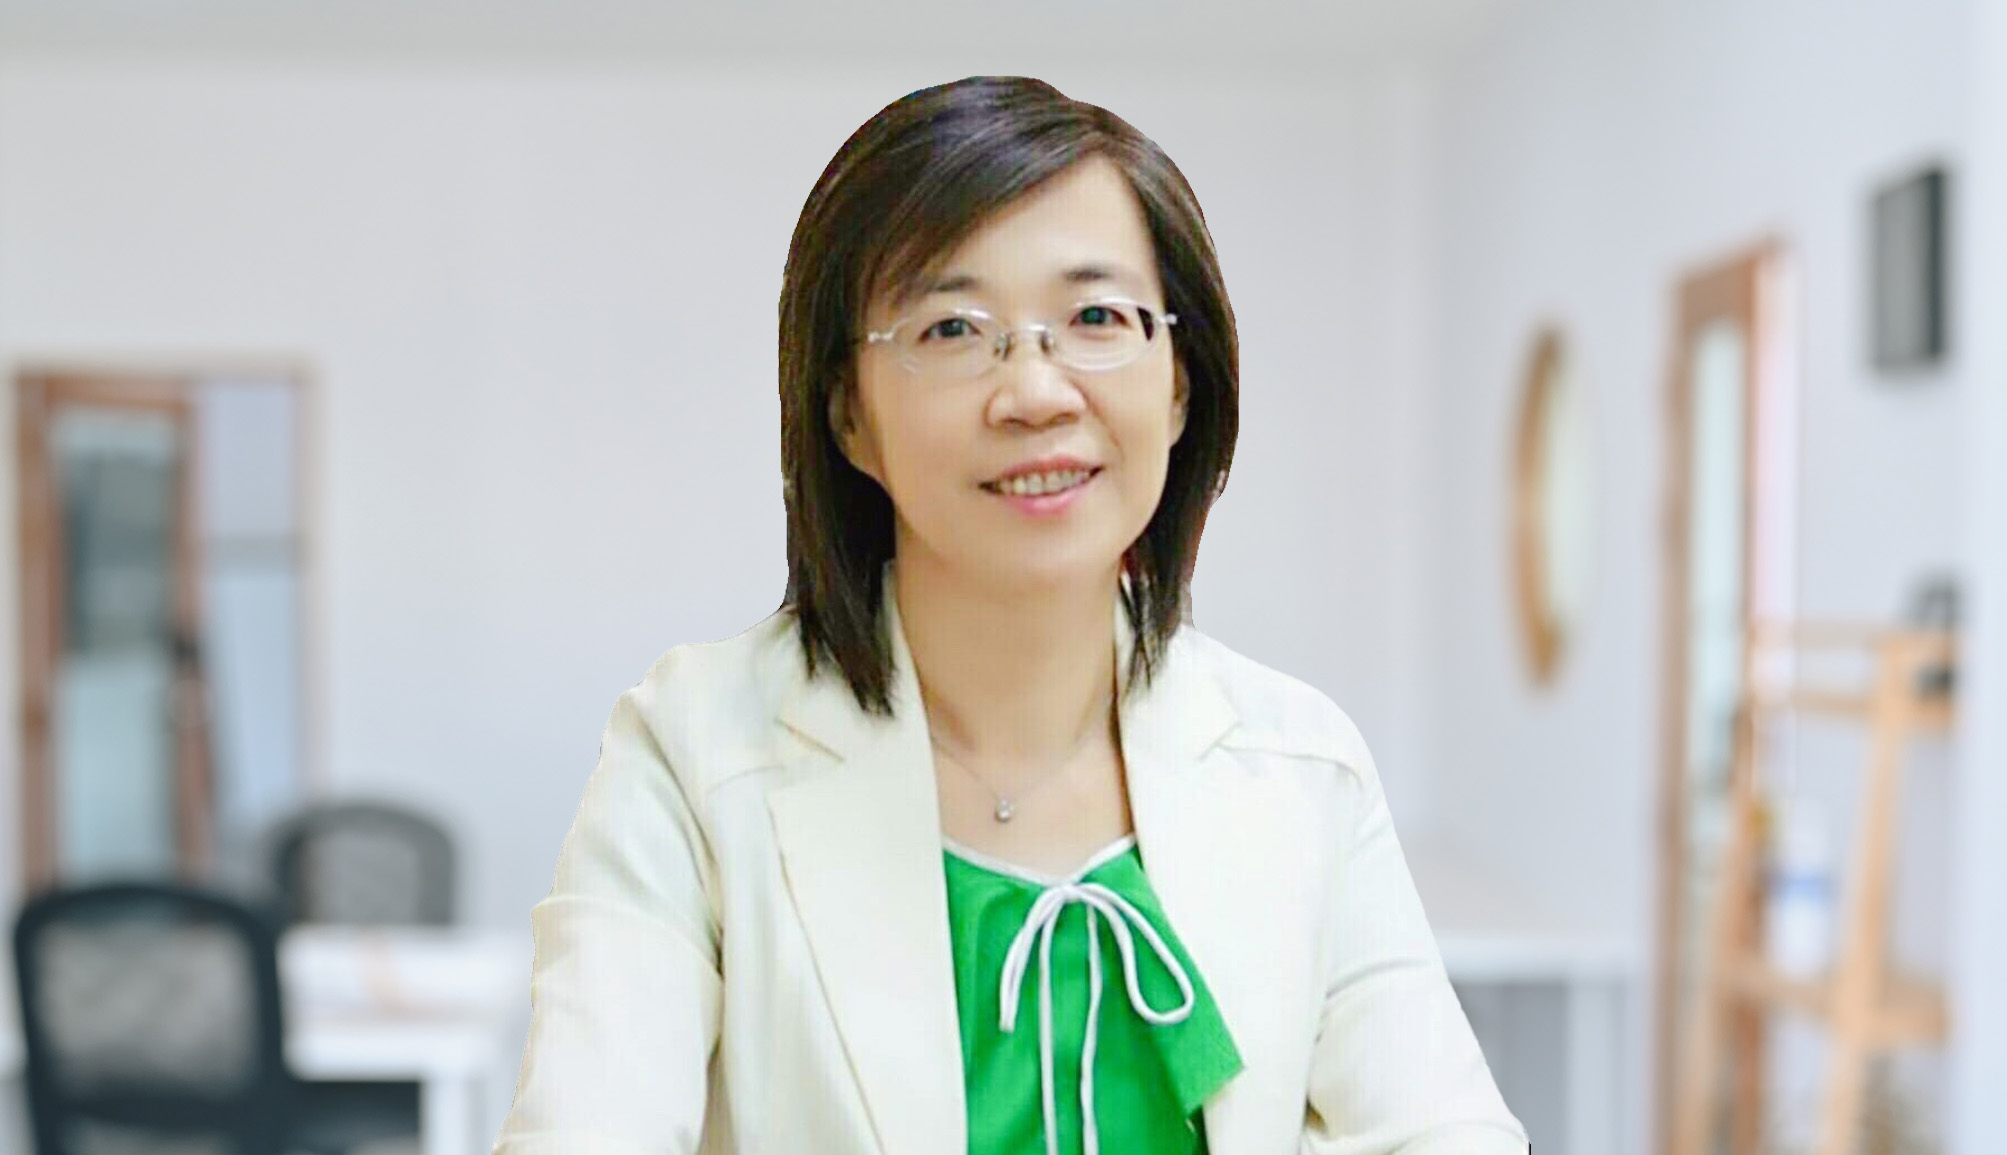 President of Taiwan Medical and Health Counseling Psychology Association / Distinguished Professor, National Taipei University of Nursing and Health Sciences, Li Yu-Chan